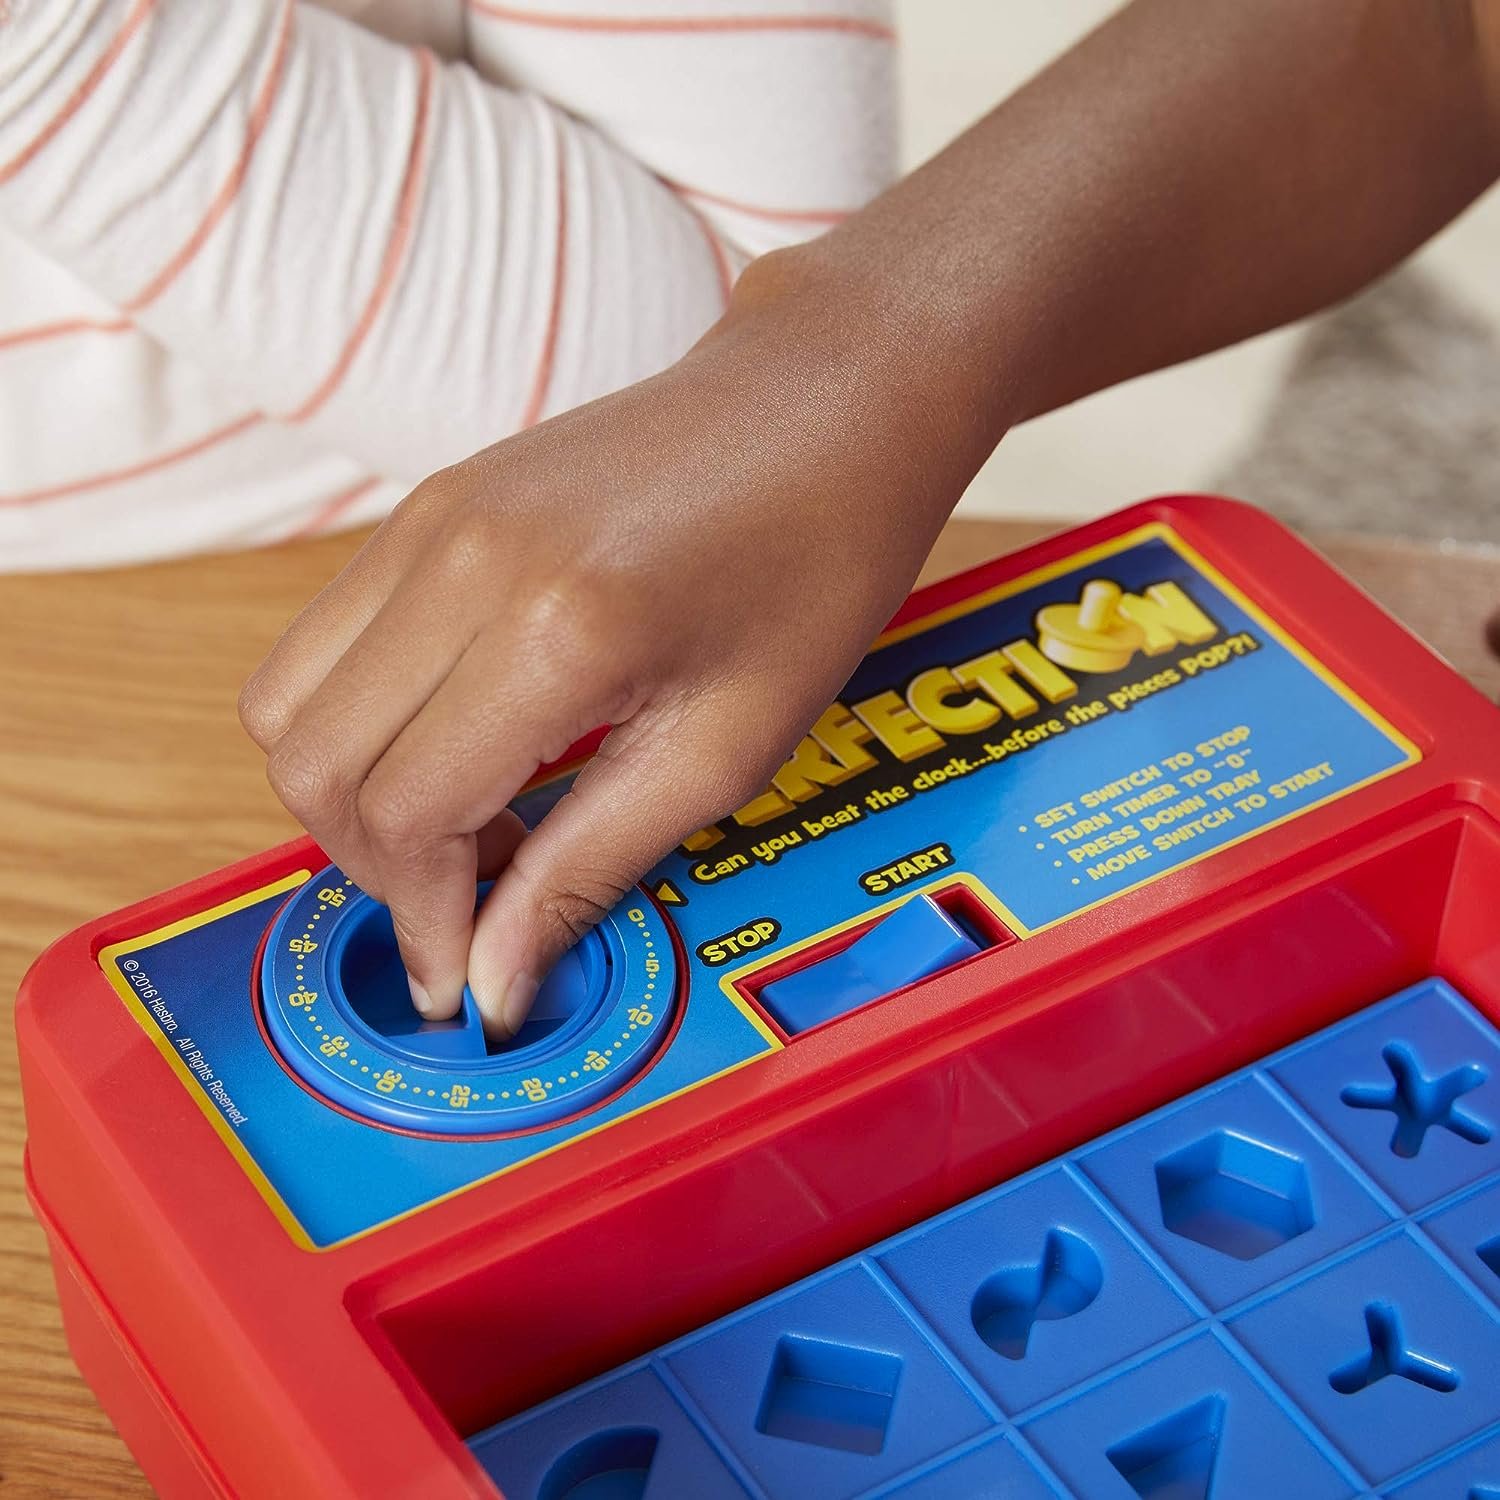 Hasbro Gaming Perfection Game, Multicolor, for ages 84 months to 120 months - image 5 of 14